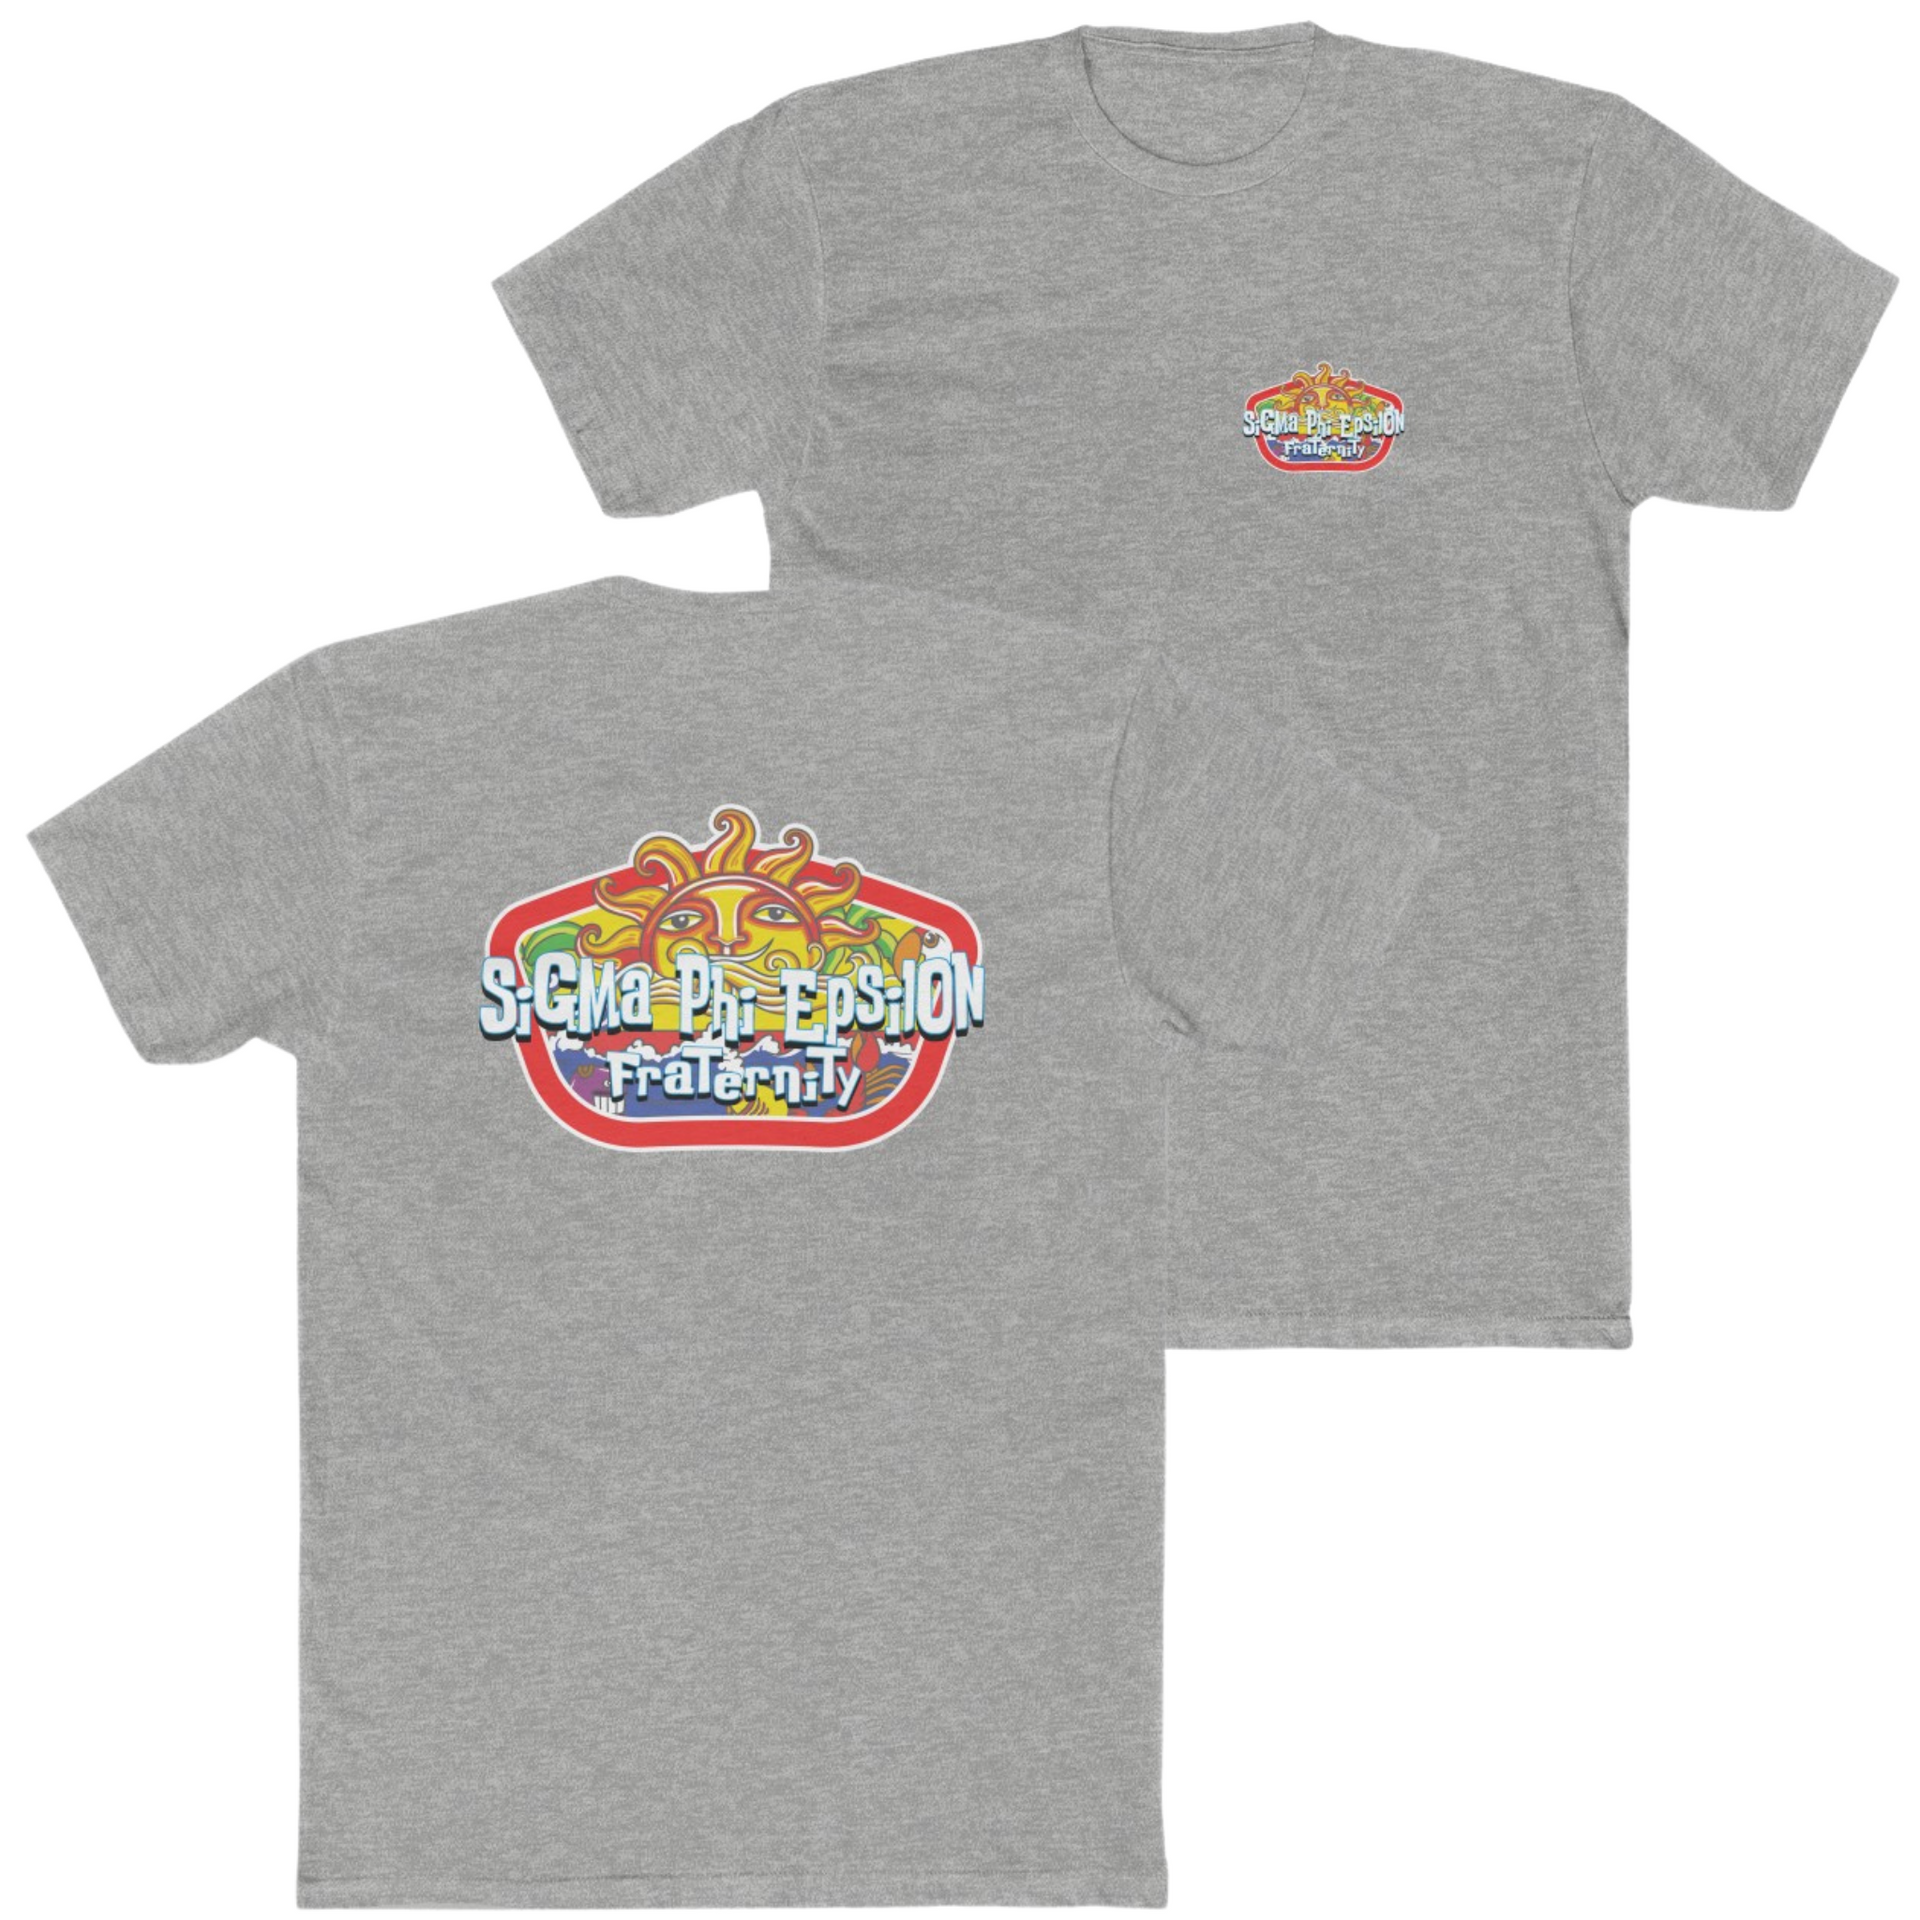 Grey Sigma Phi Epsilon Graphic T-Shirt | Summer Sol | SigEp Fraternity Clothes and Merchandise